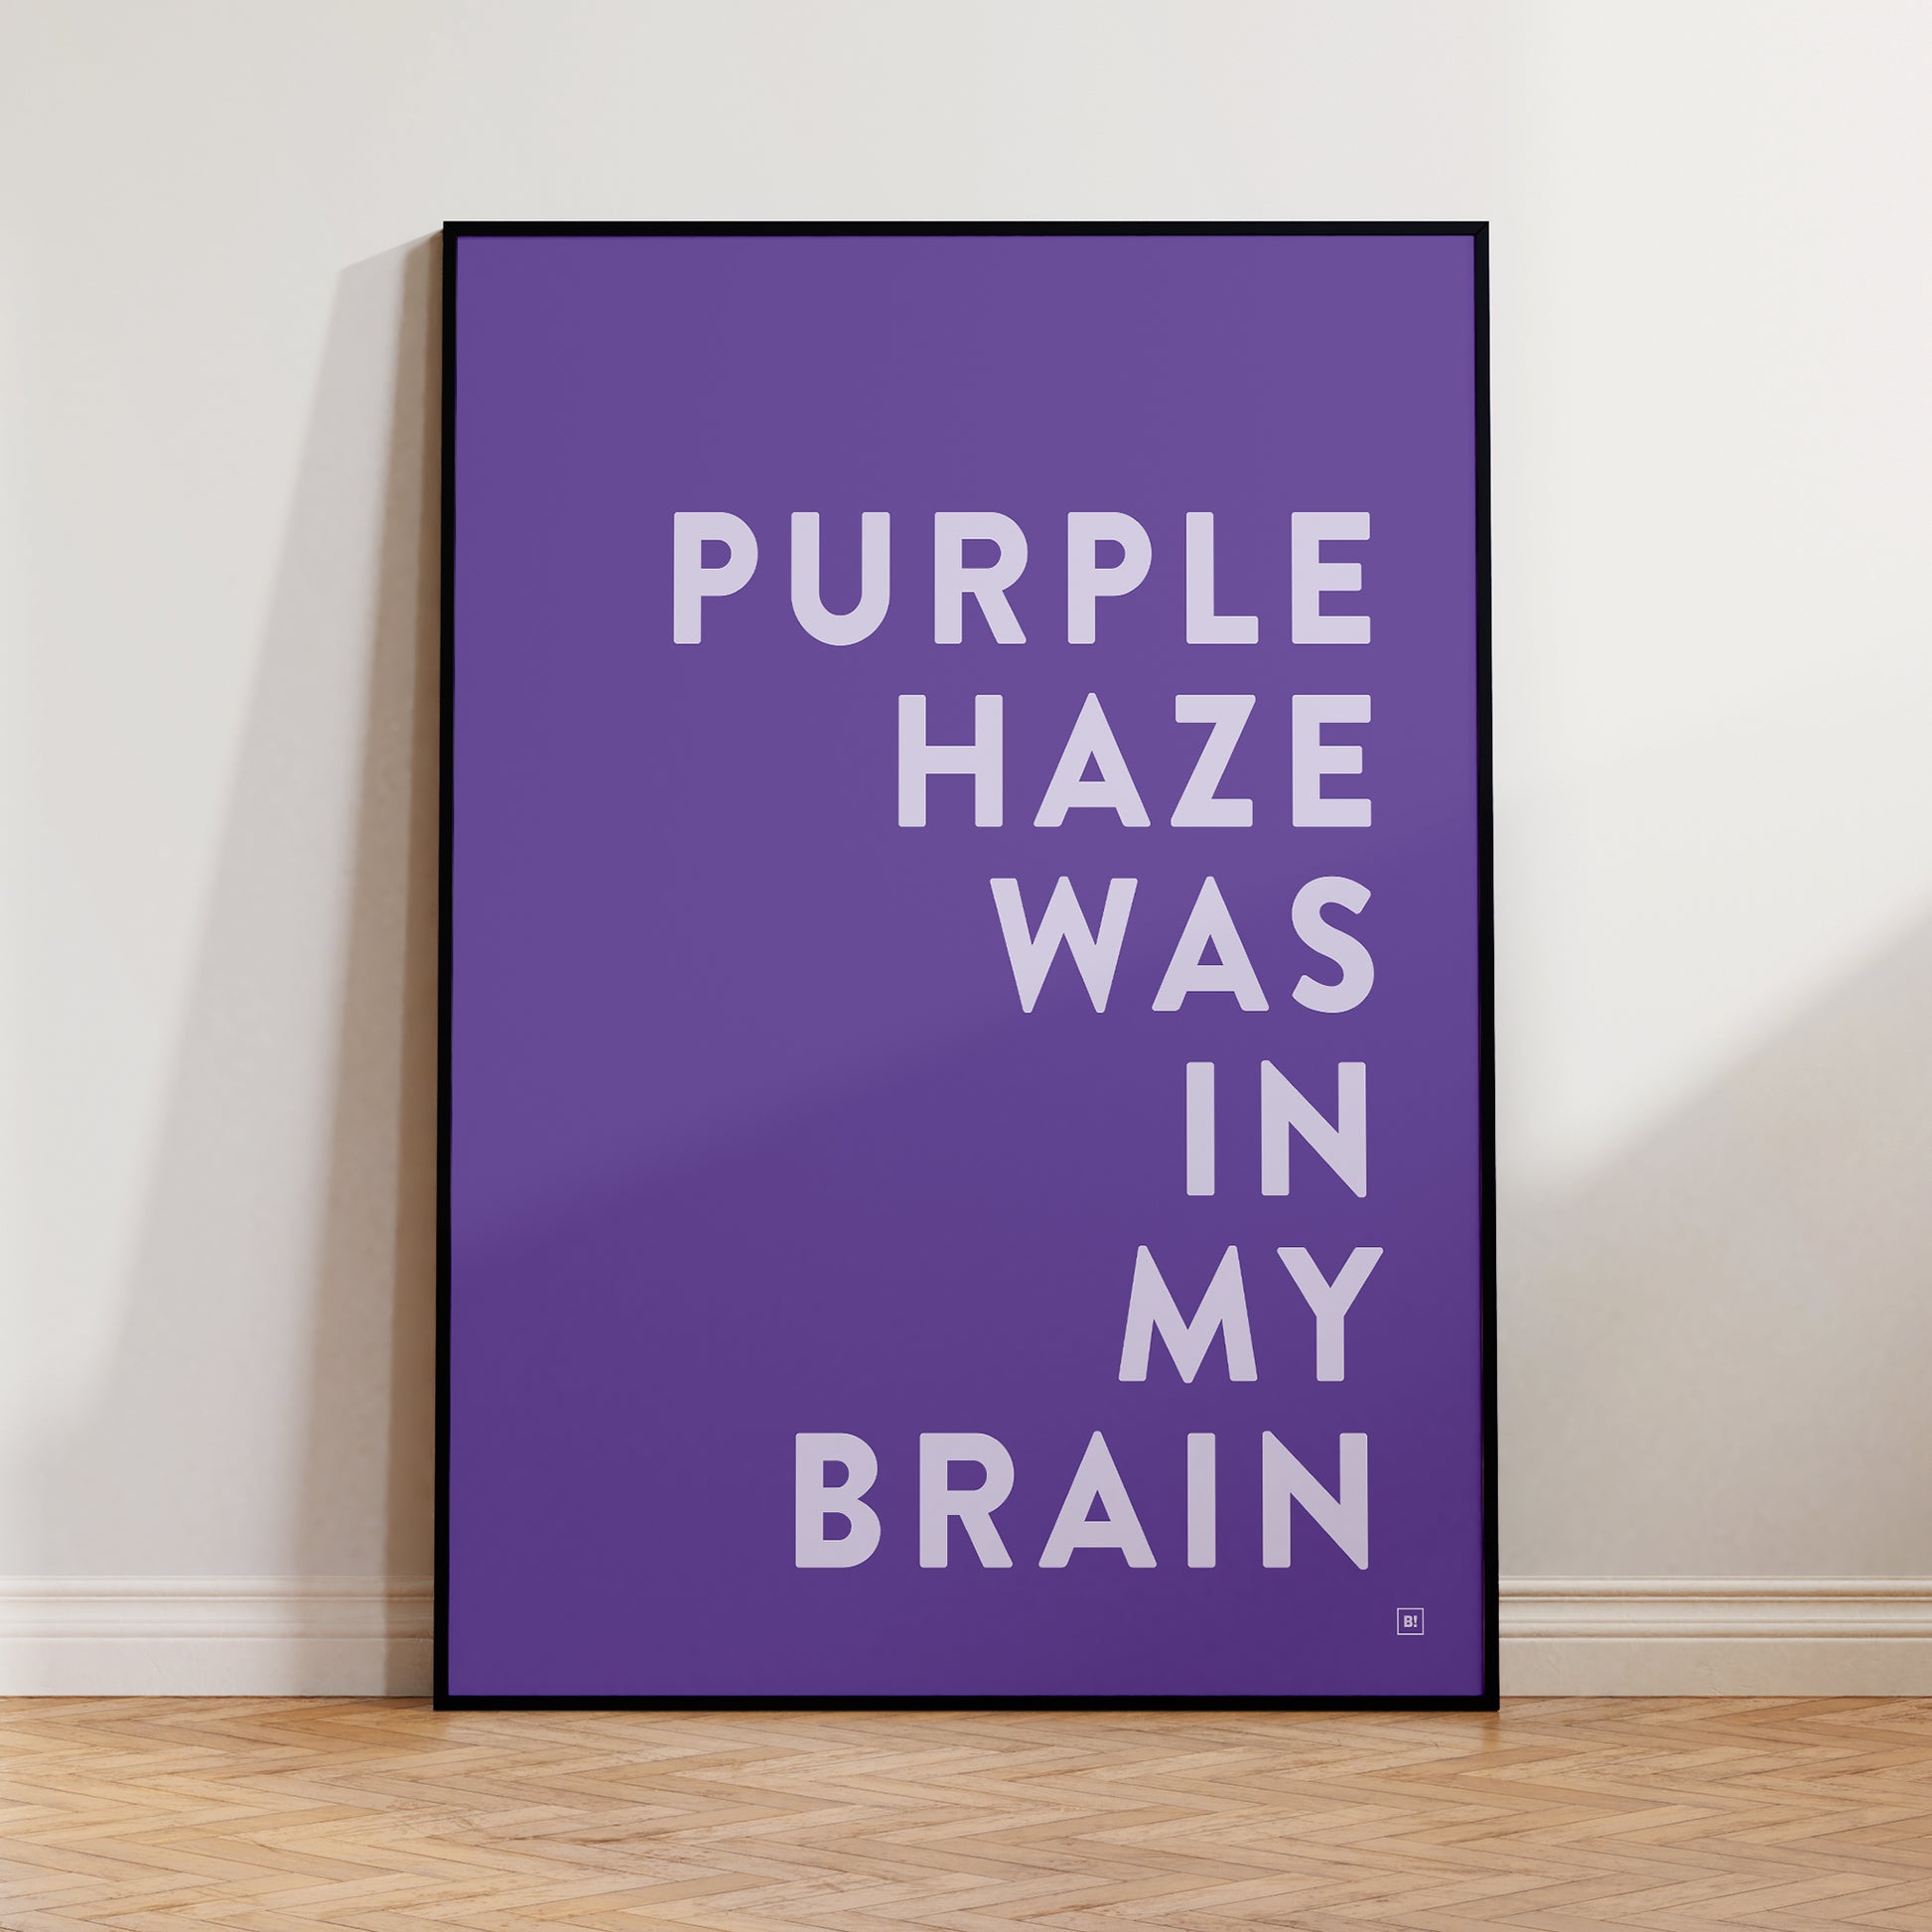 Be inspired by our Jimi Hendrix "Purple Haze Was In My Brain" lyric art print! This artwork has been printed using the giclée process on archival acid-free paper and is presented in a sleek black frame, showcasing its timeless beauty in every detail.